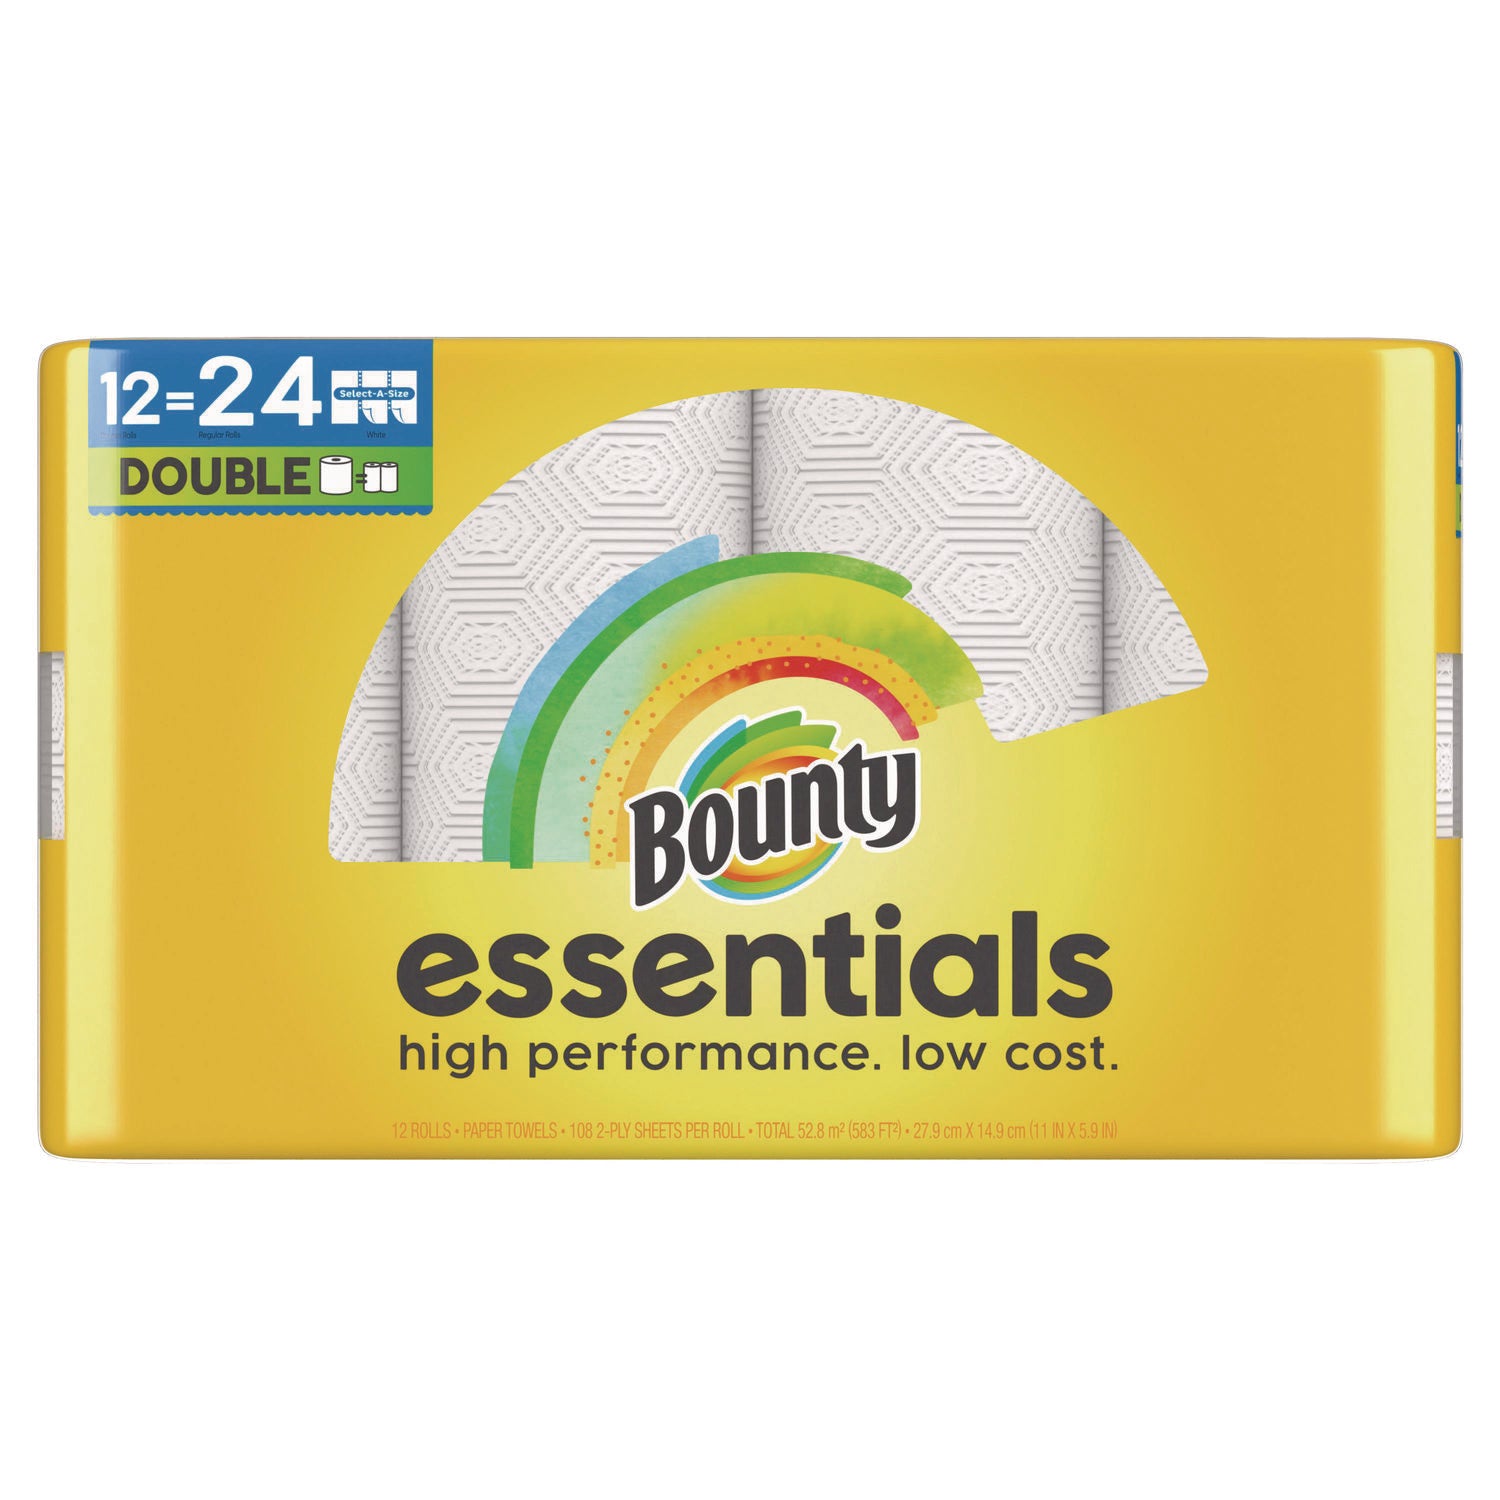 essentials-select-a-size-kitchen-roll-paper-towels-2-ply-108-sheets-roll-12-rolls-carton_pgc11093 - 1